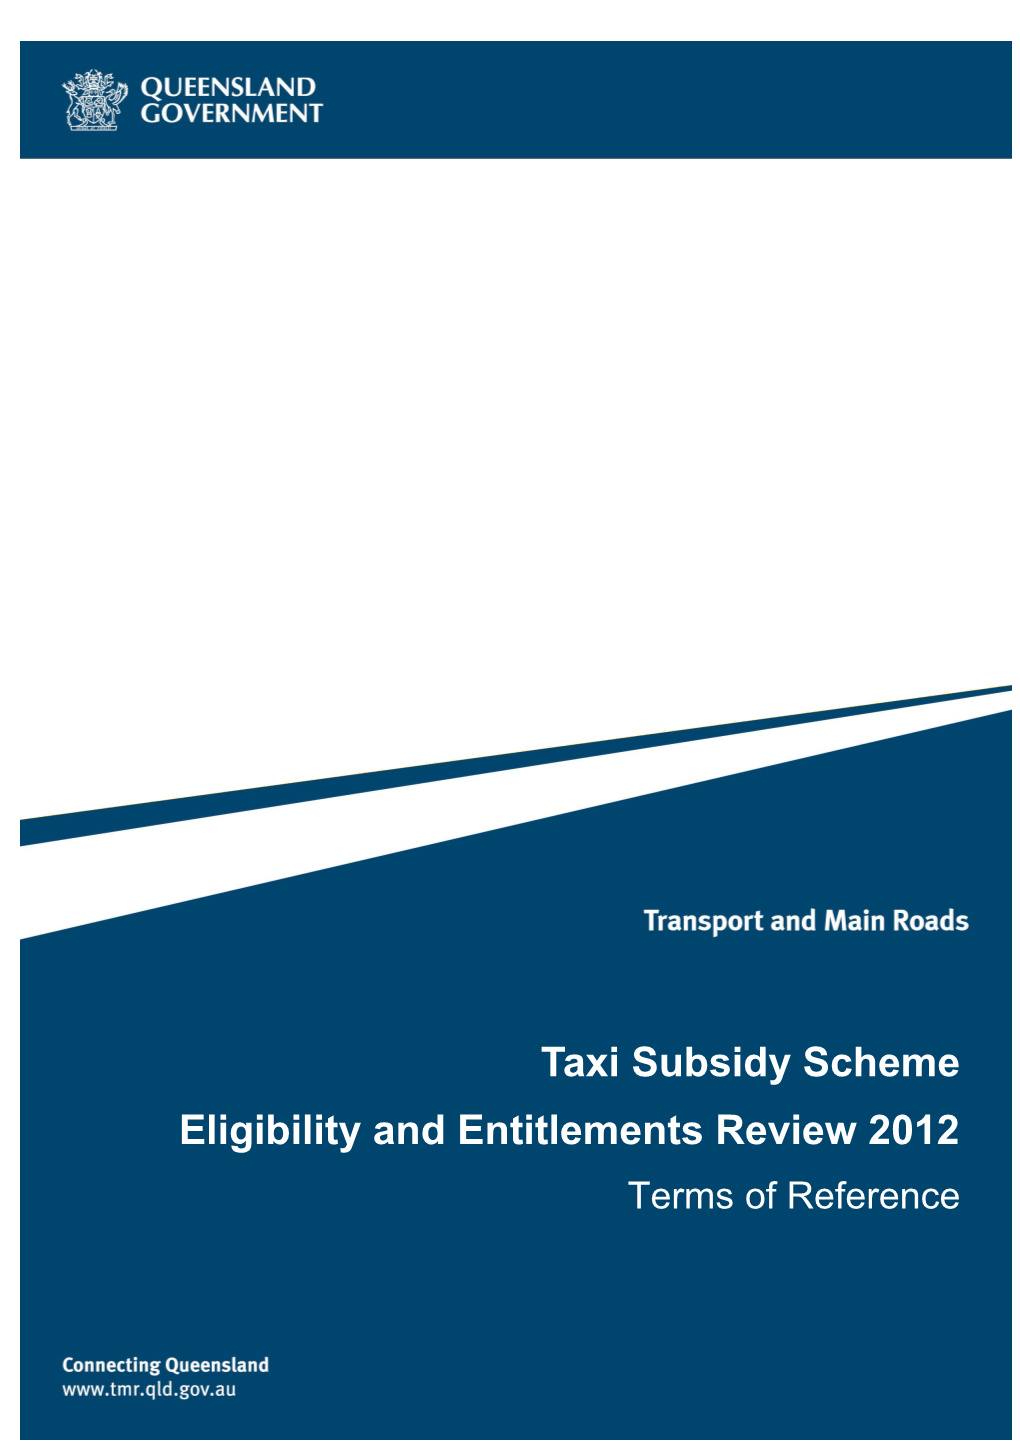 Eligibility and Entitlements Review 2012